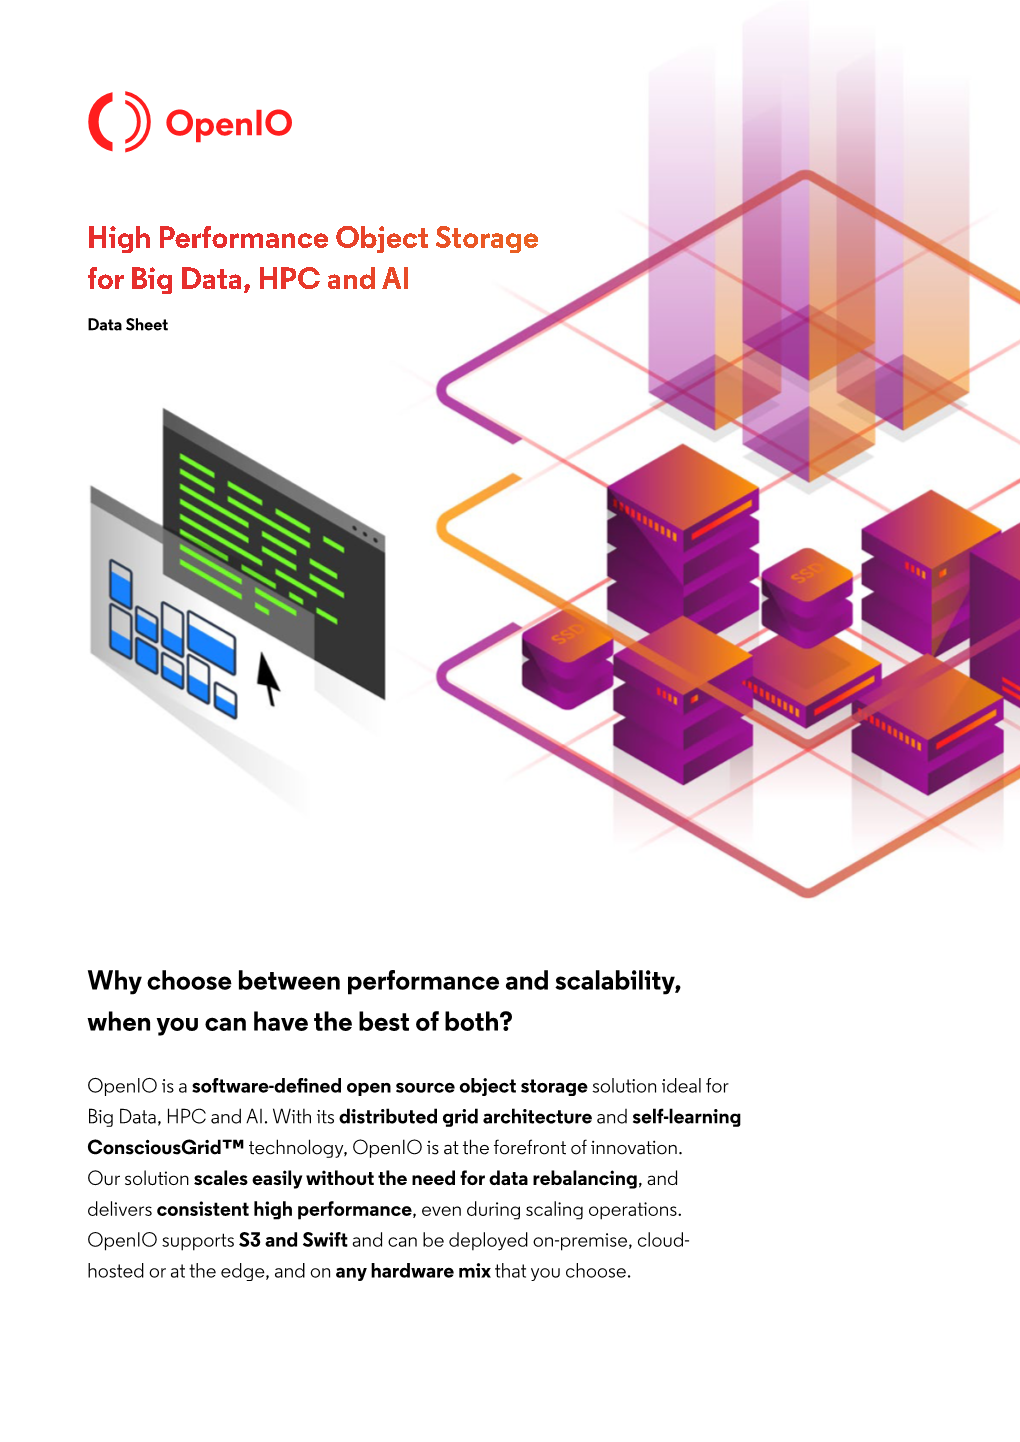 High Performance Object Storage for Big Data, HPC and AI